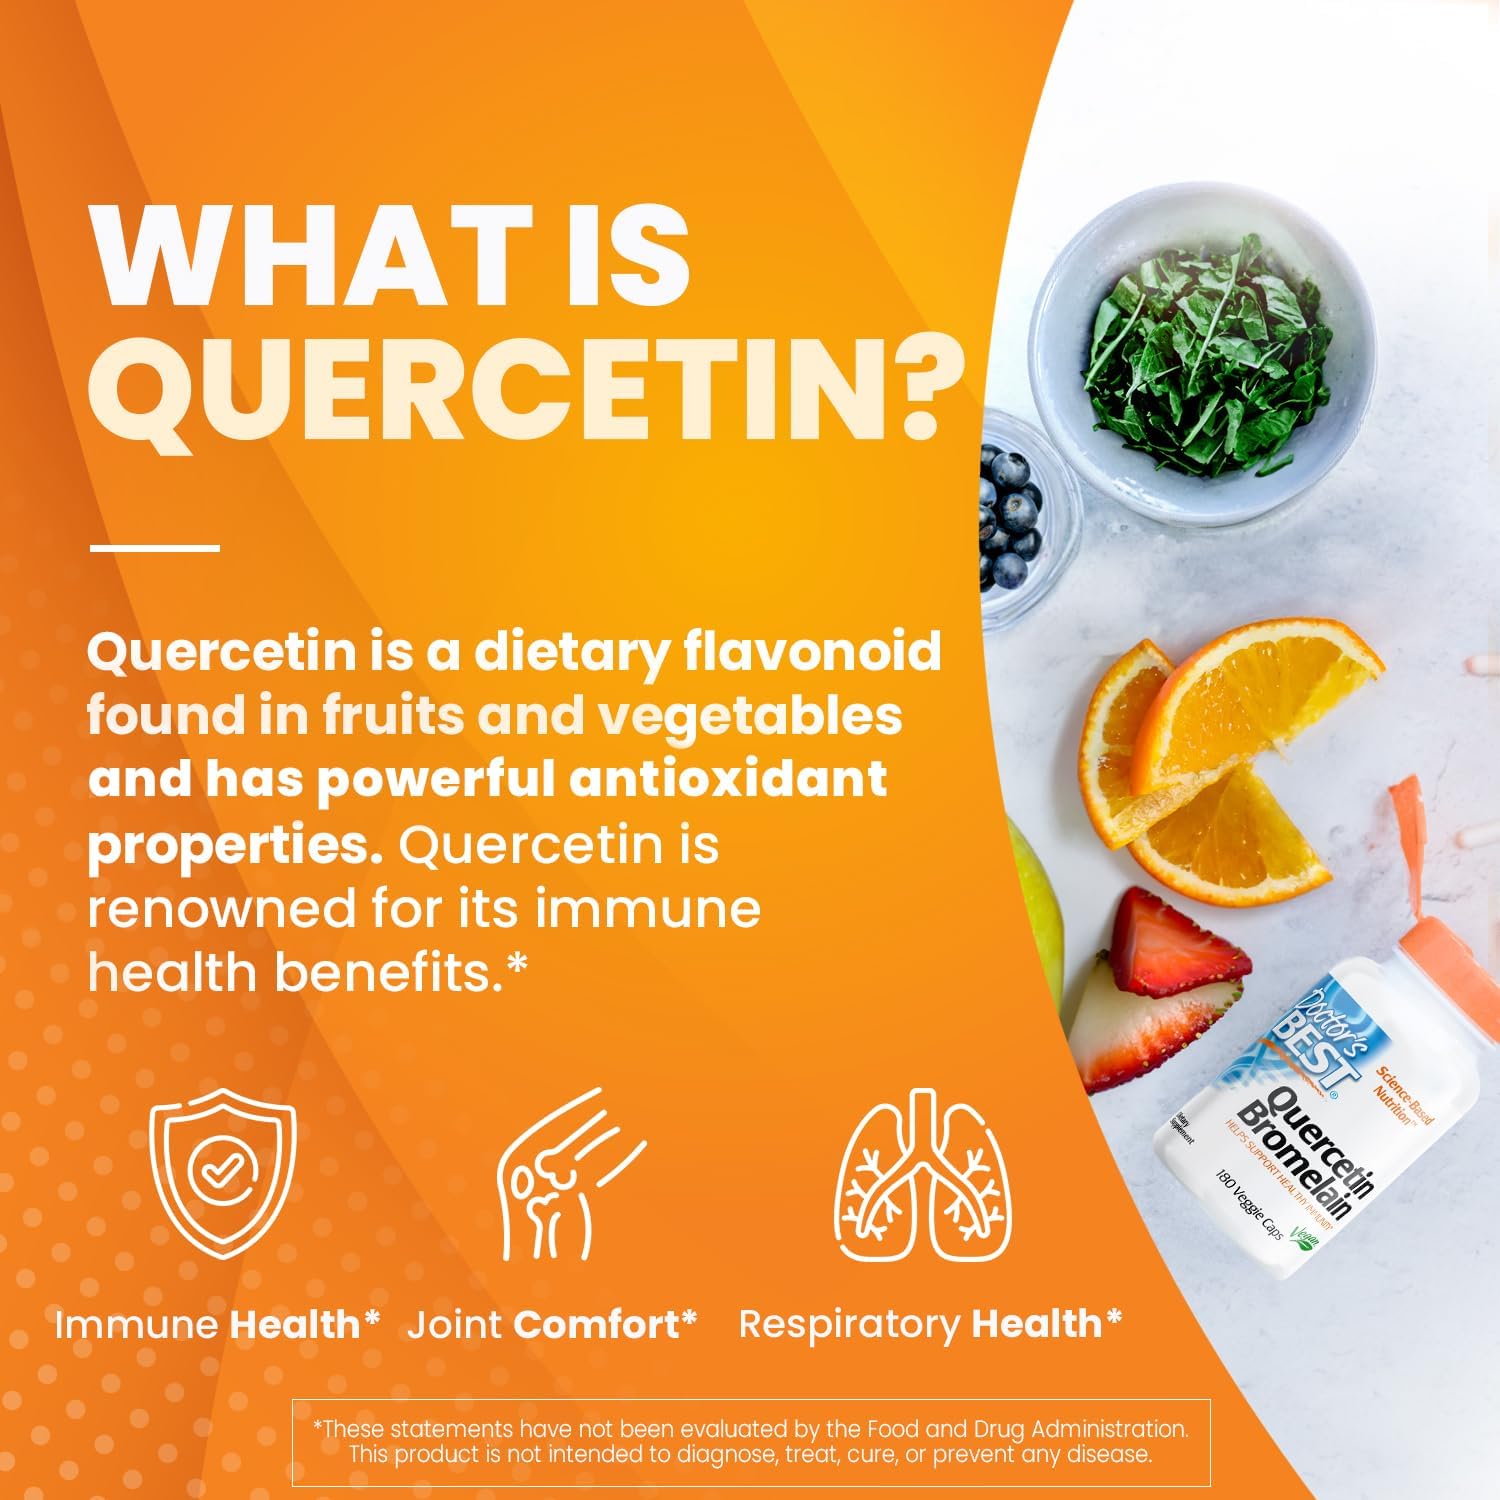 Doctors Best Quercetin Bromelain, Immunity Support, Heart, Joint  Healthy Respiratory System, Non-GMO, Vegan, Gluten Free, Soy Free,180 VC